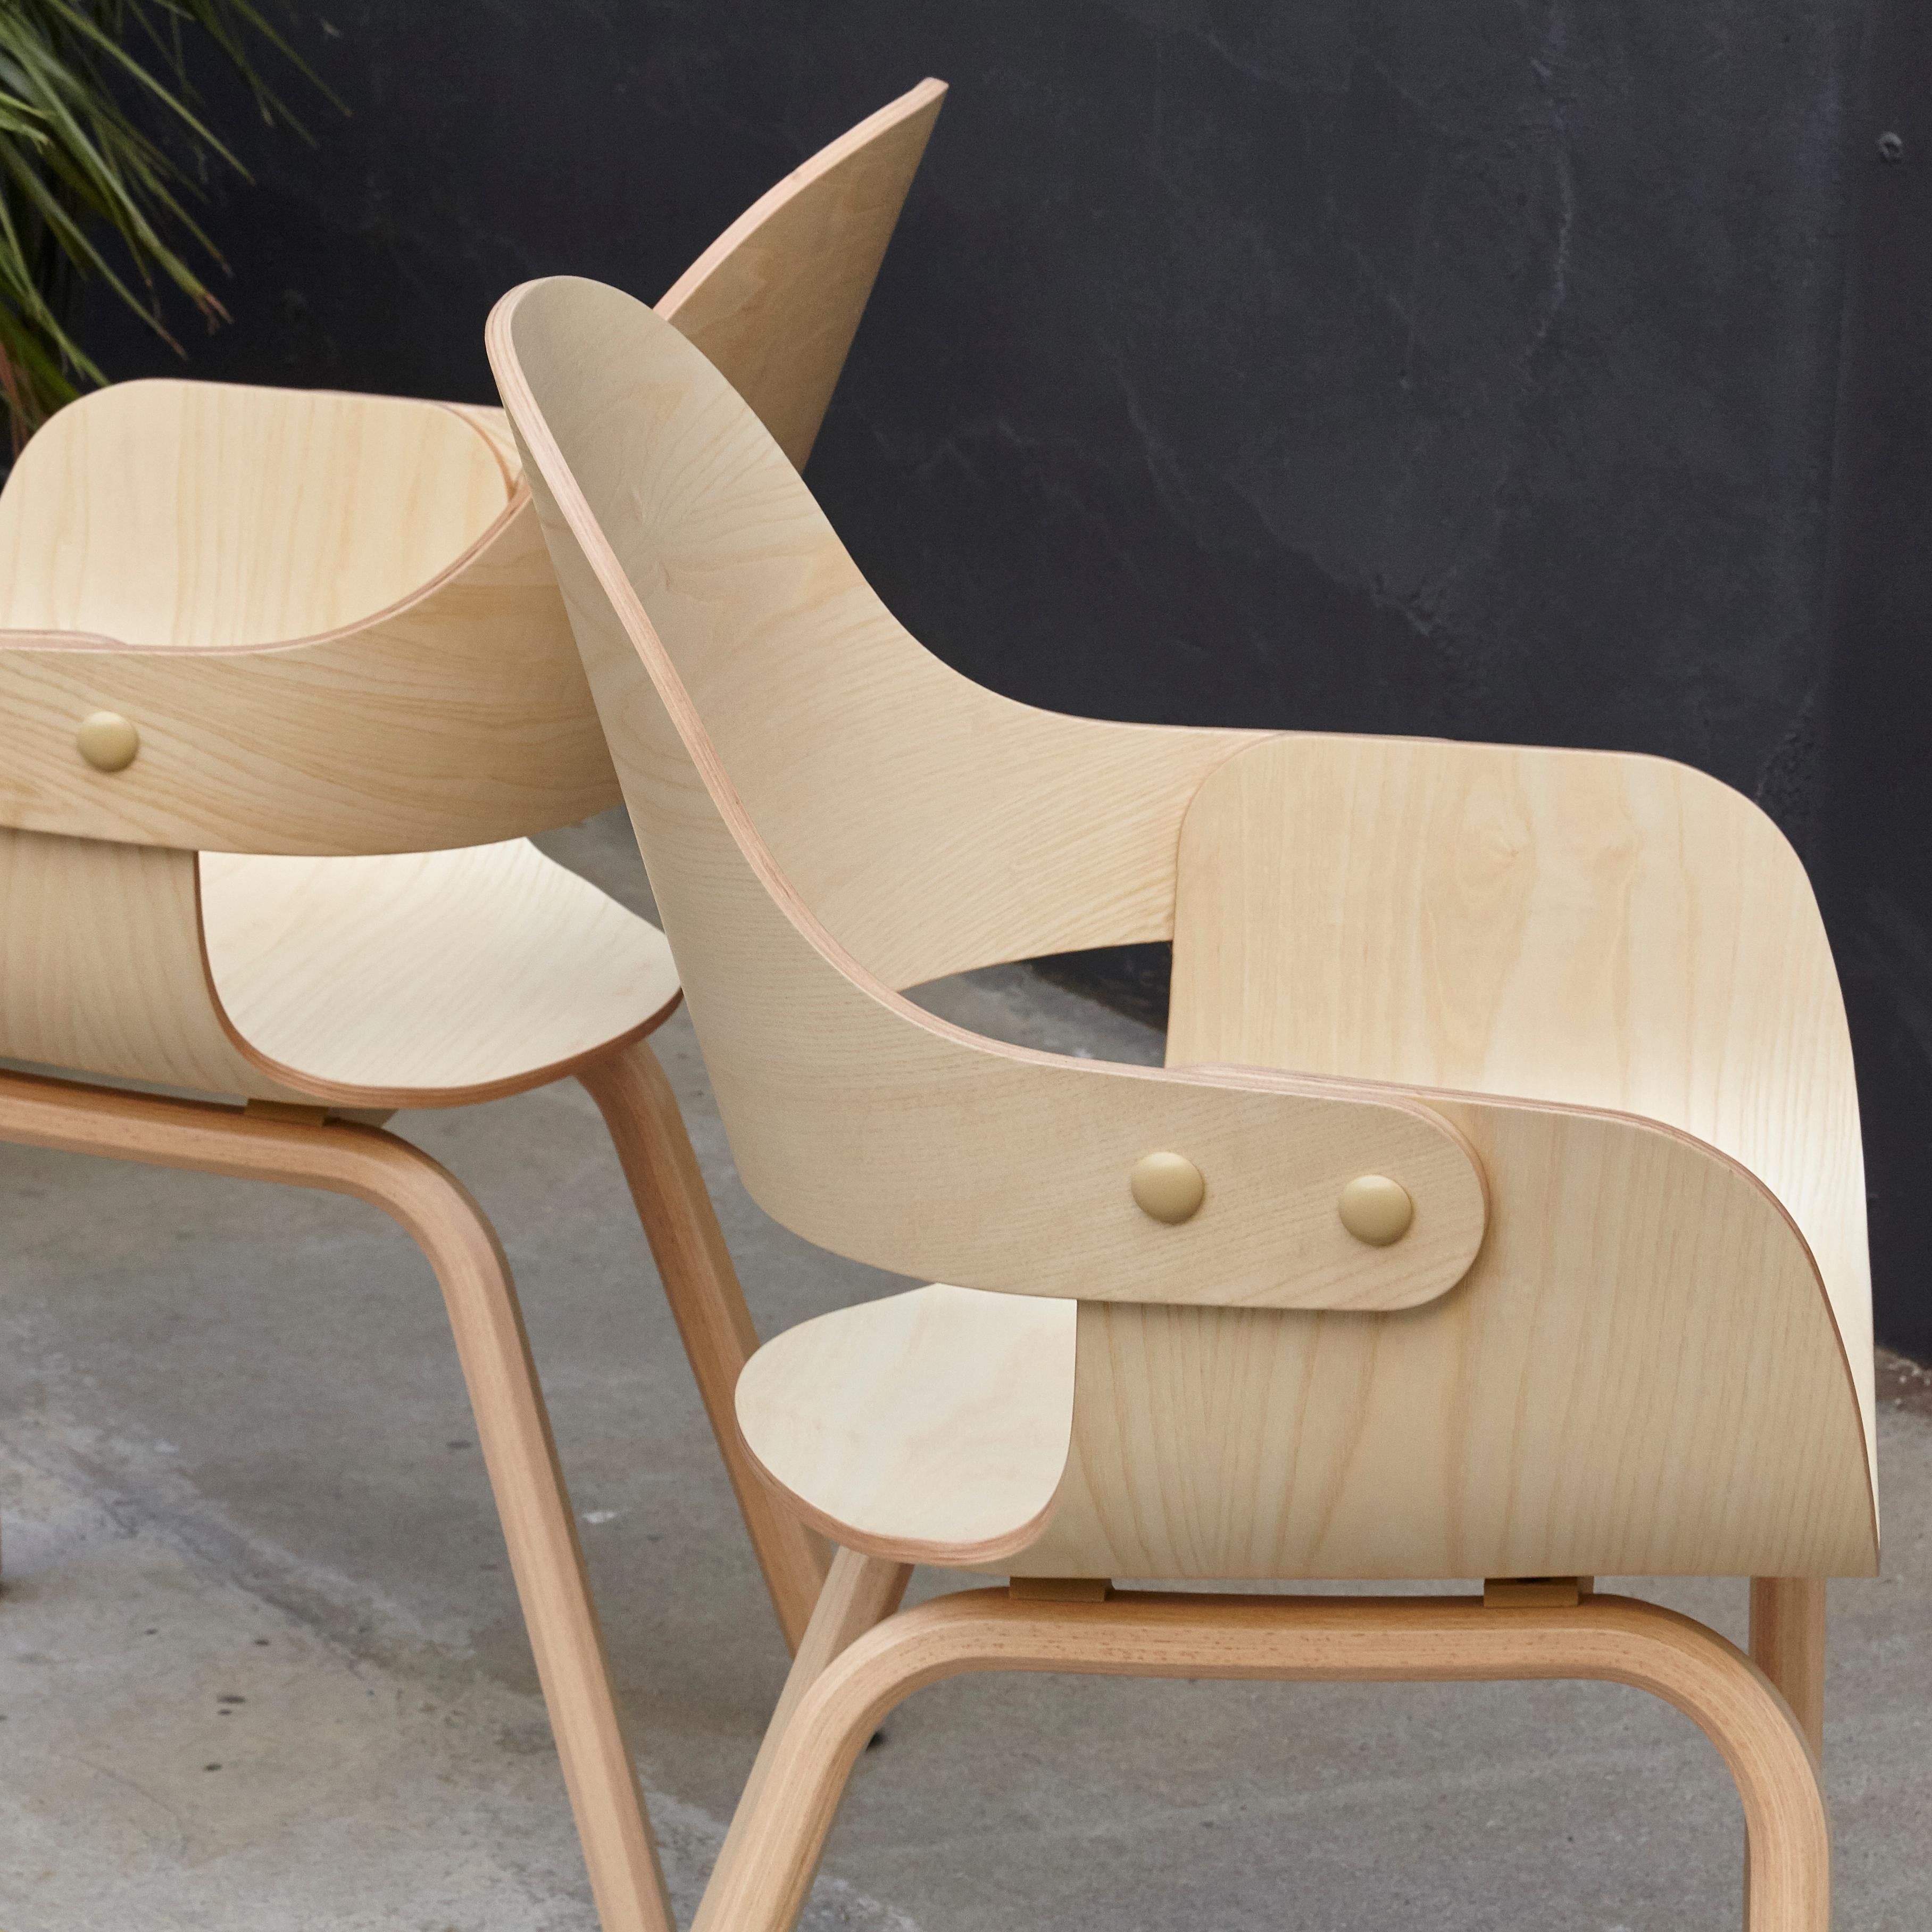 Spanish Pair of Jaime Hayon, Contemporary, Wood Chair Showtime Nude by BD Barcelona ENVIO